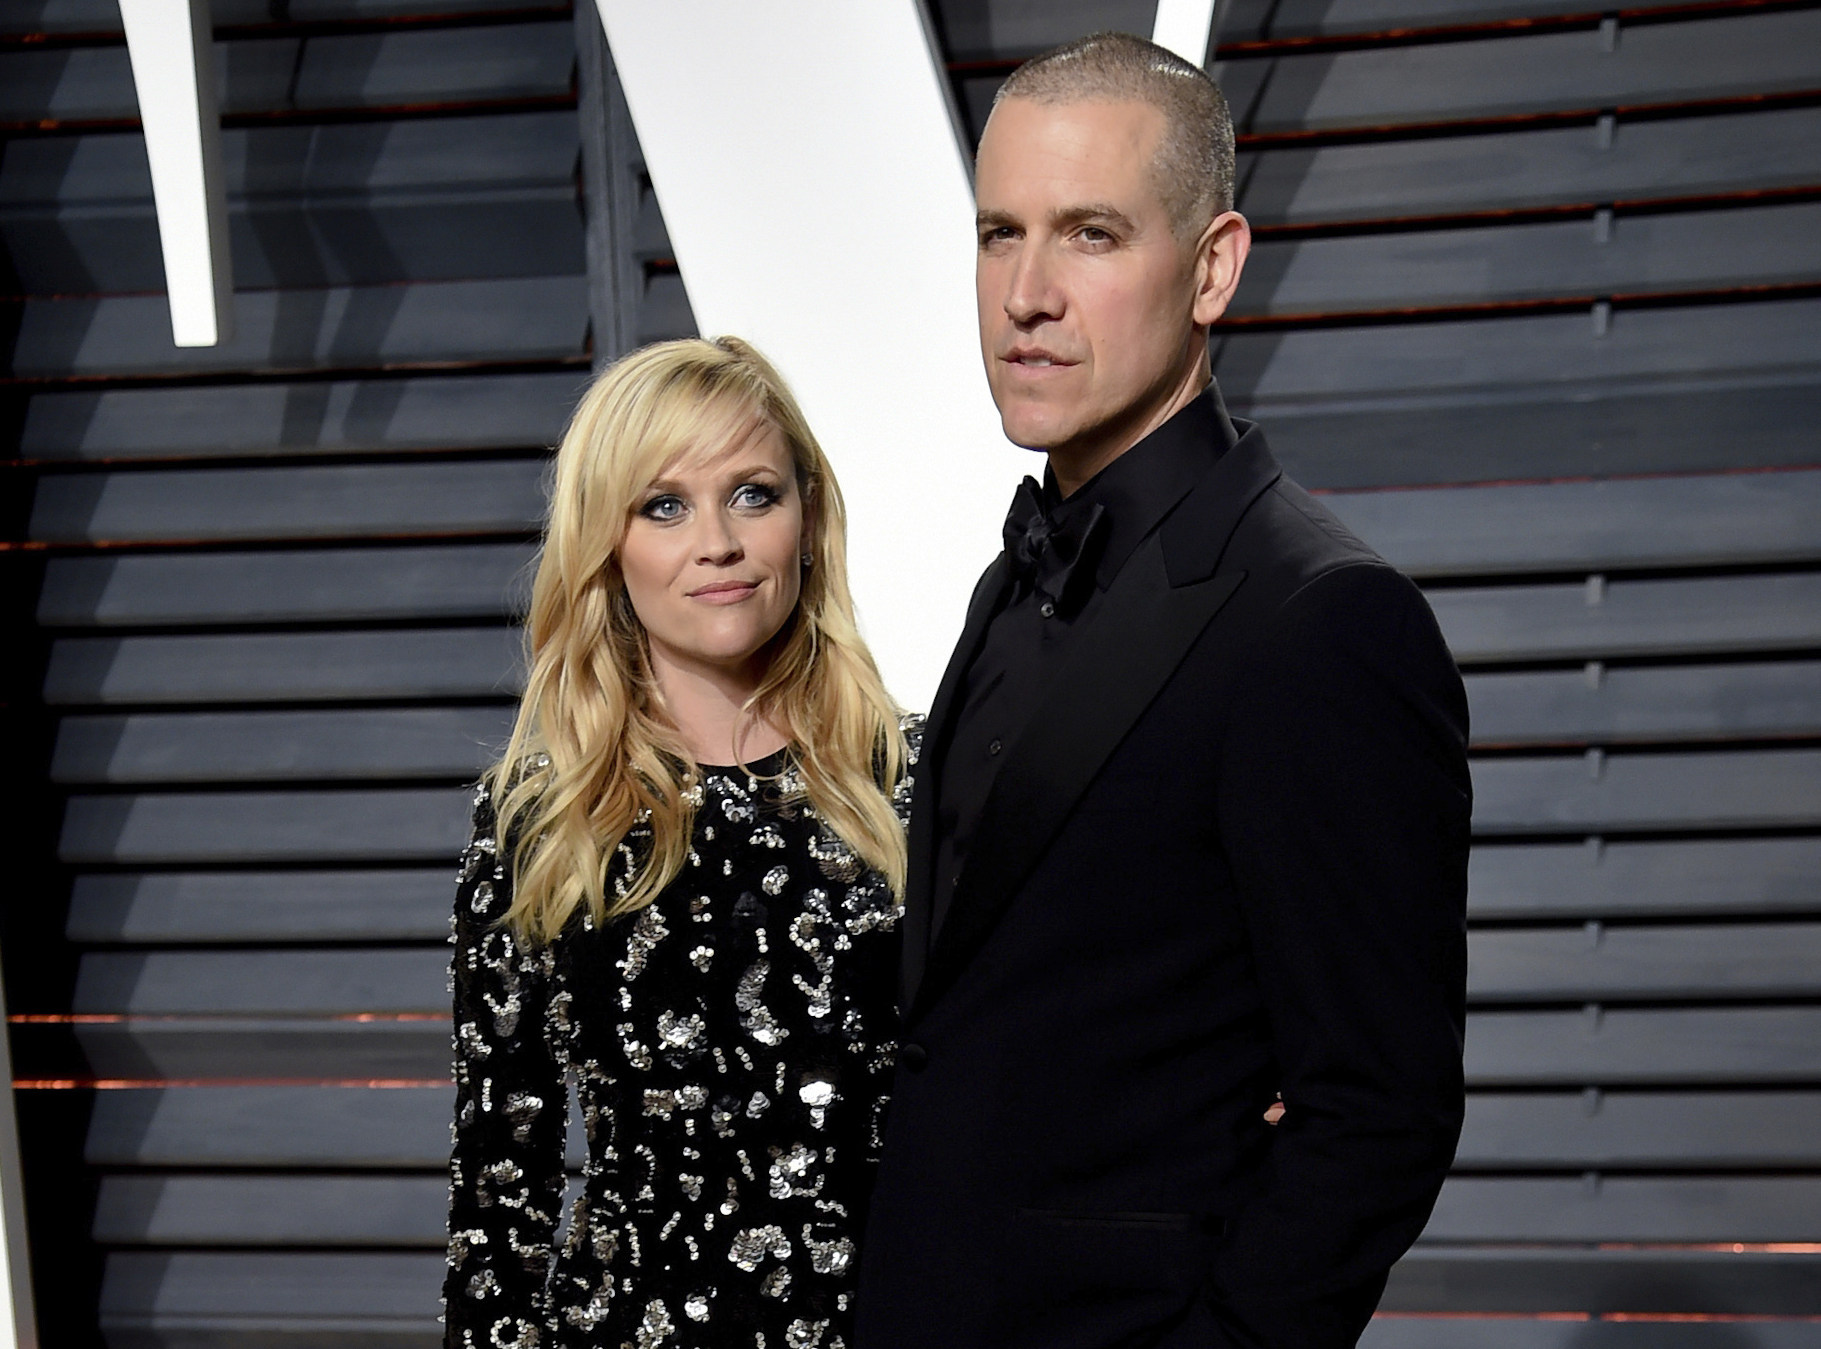 Reese Witherspoon and Jim Toth tied the knot in 2011. File photo: Invision/AP